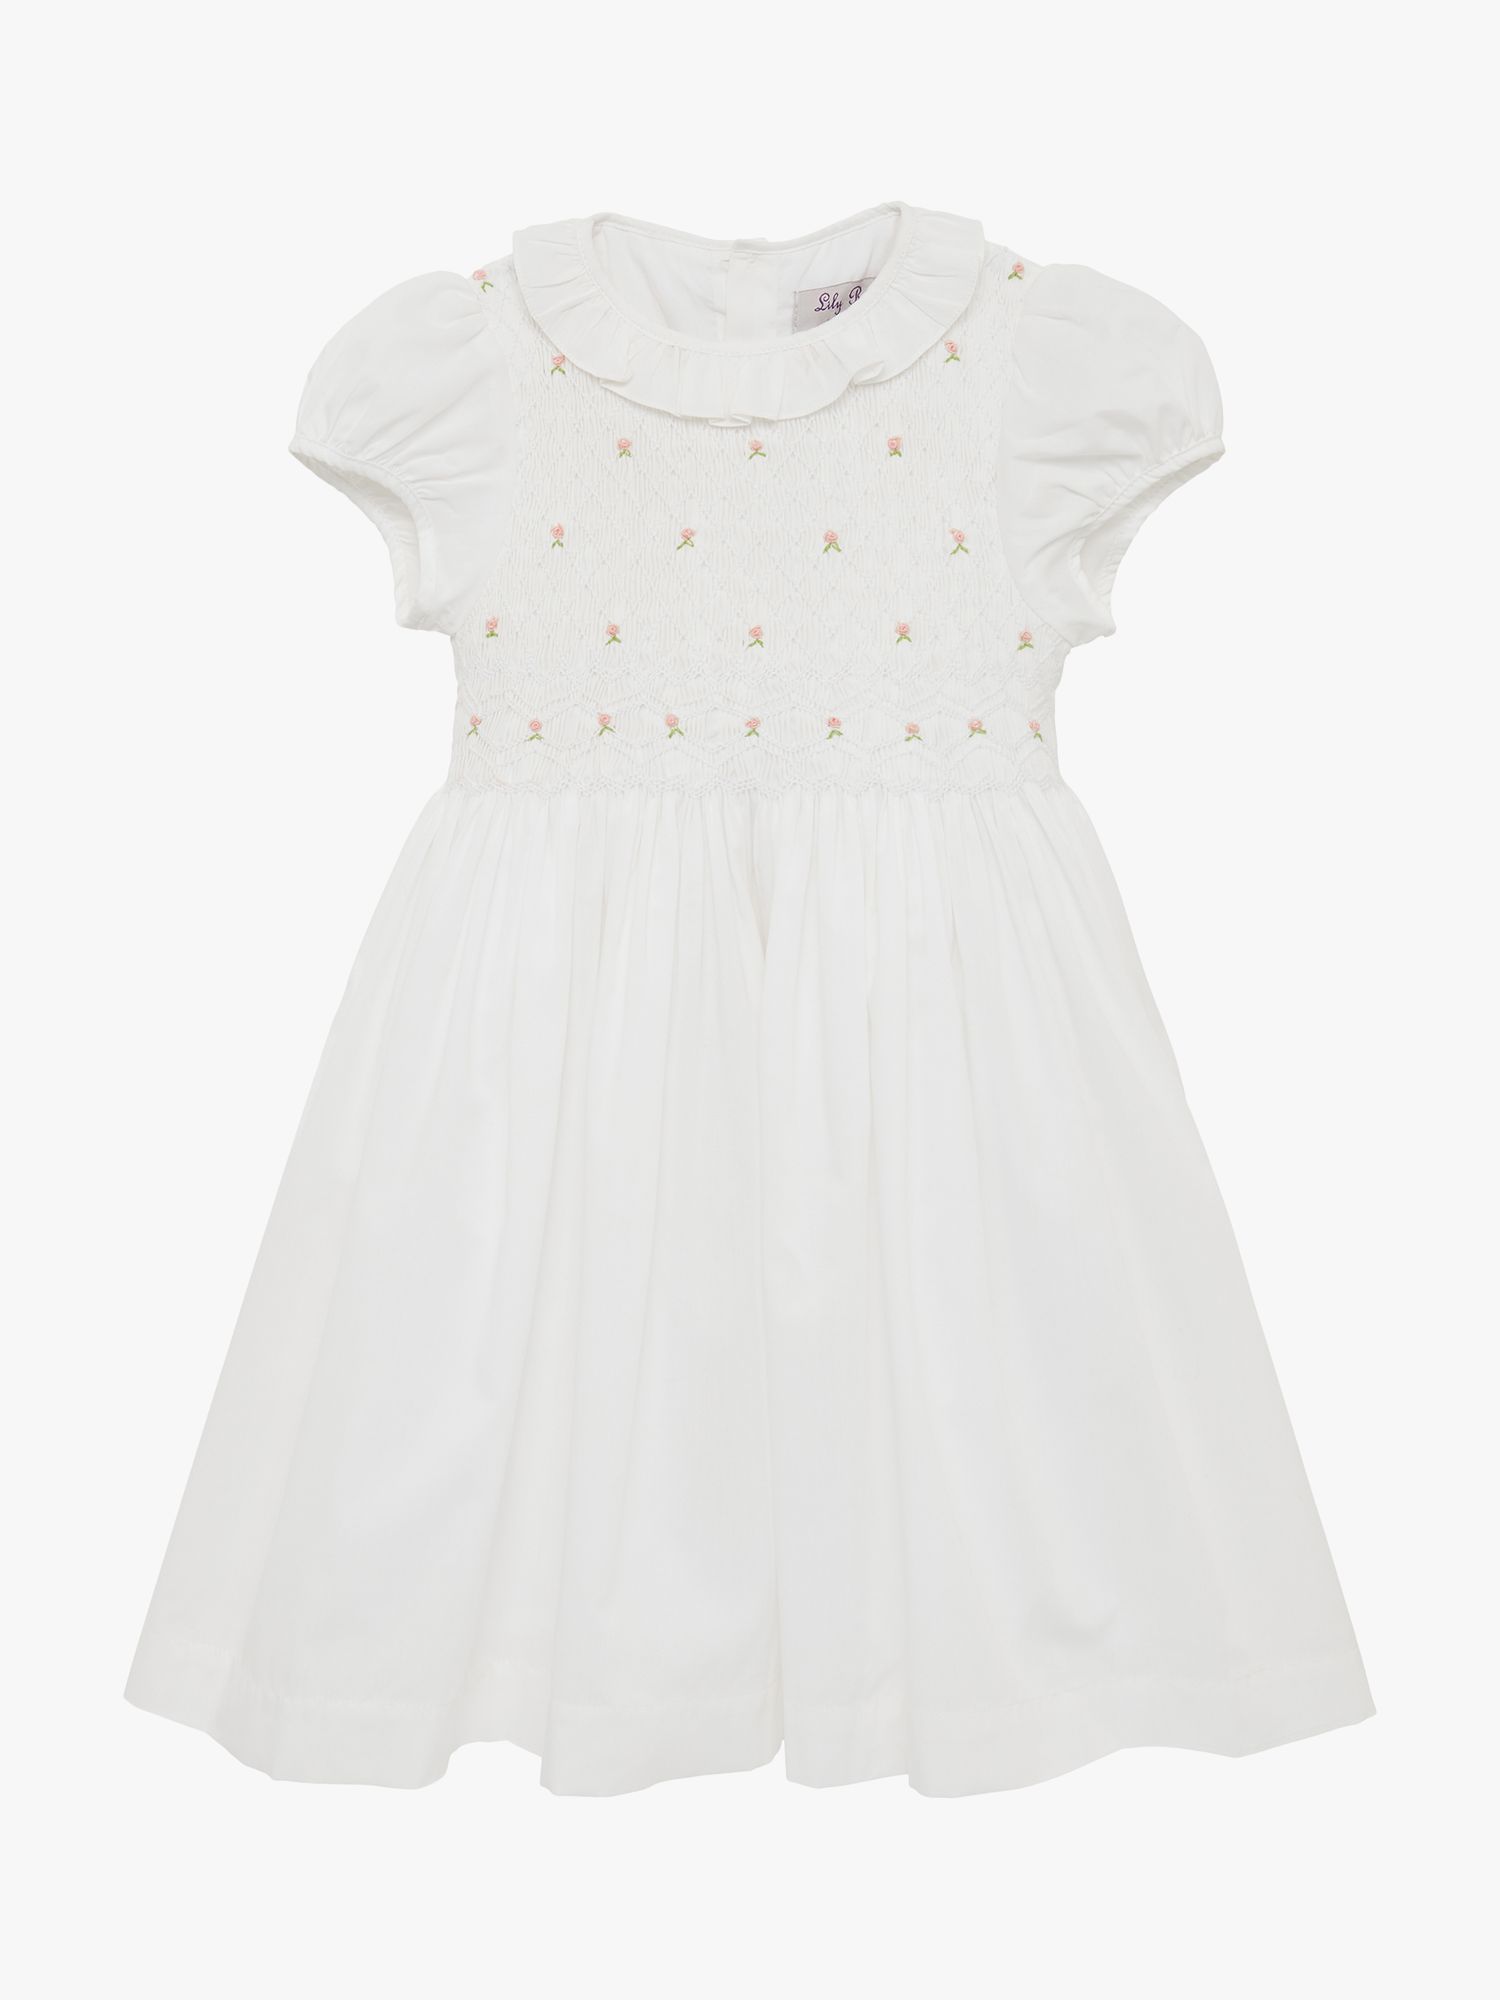 Trotters Willow Baby Hand Smocked Bodice Dress, White, 2 years